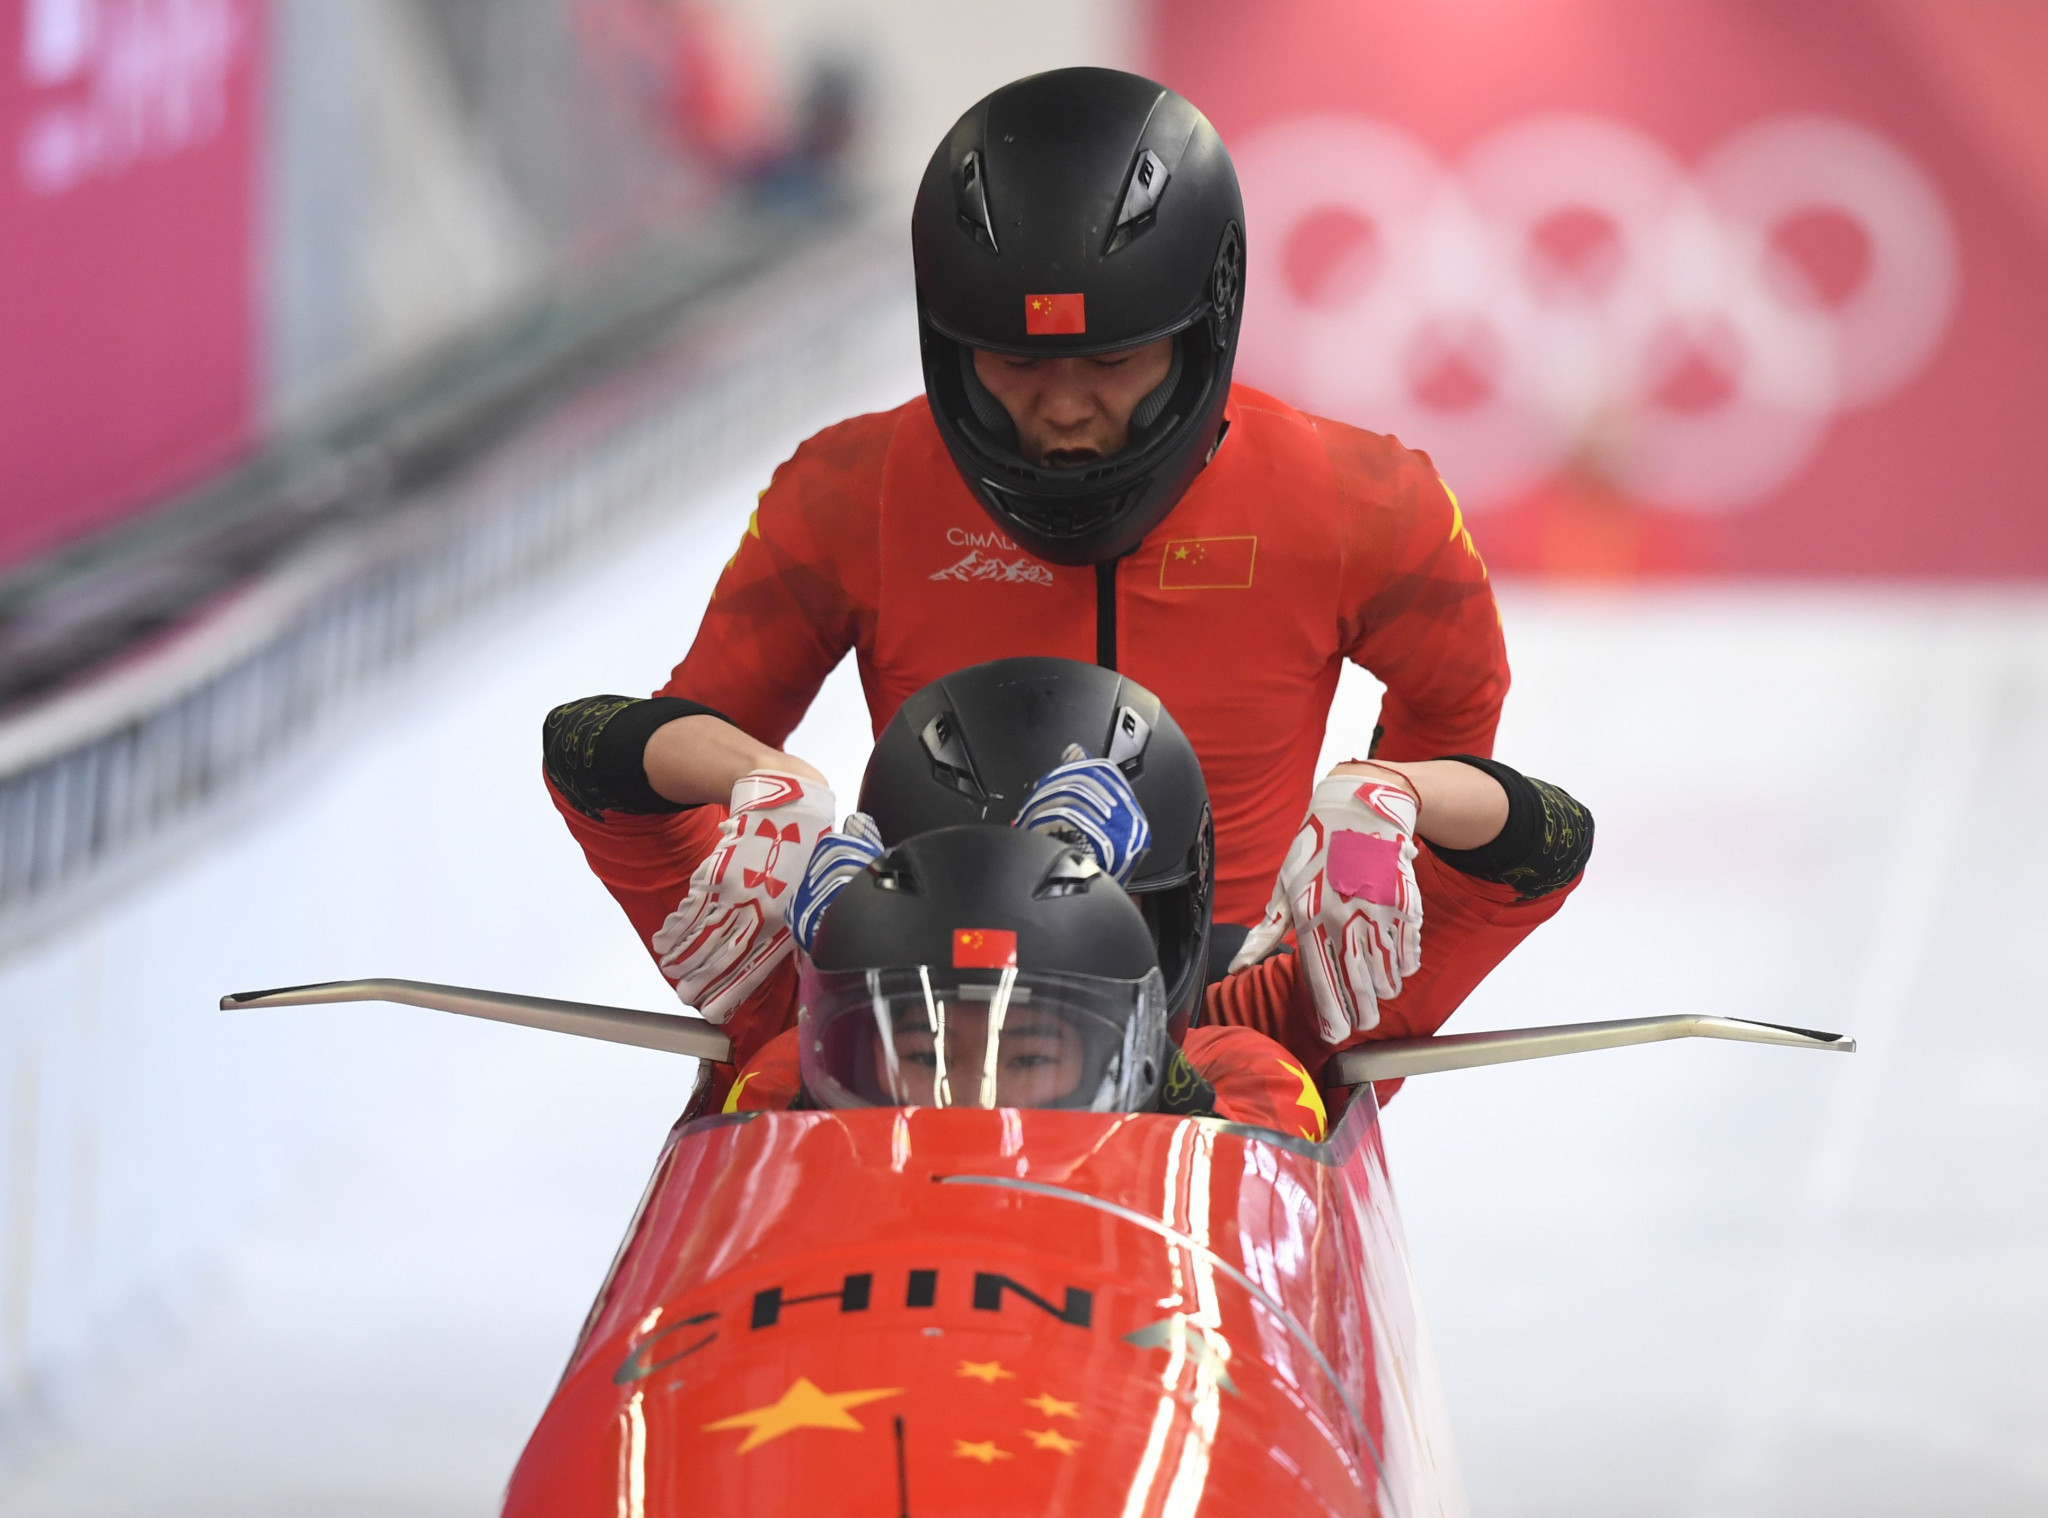 Bobsleigh is a sport in which China wants to improve before their home Olympics ©Getty Images